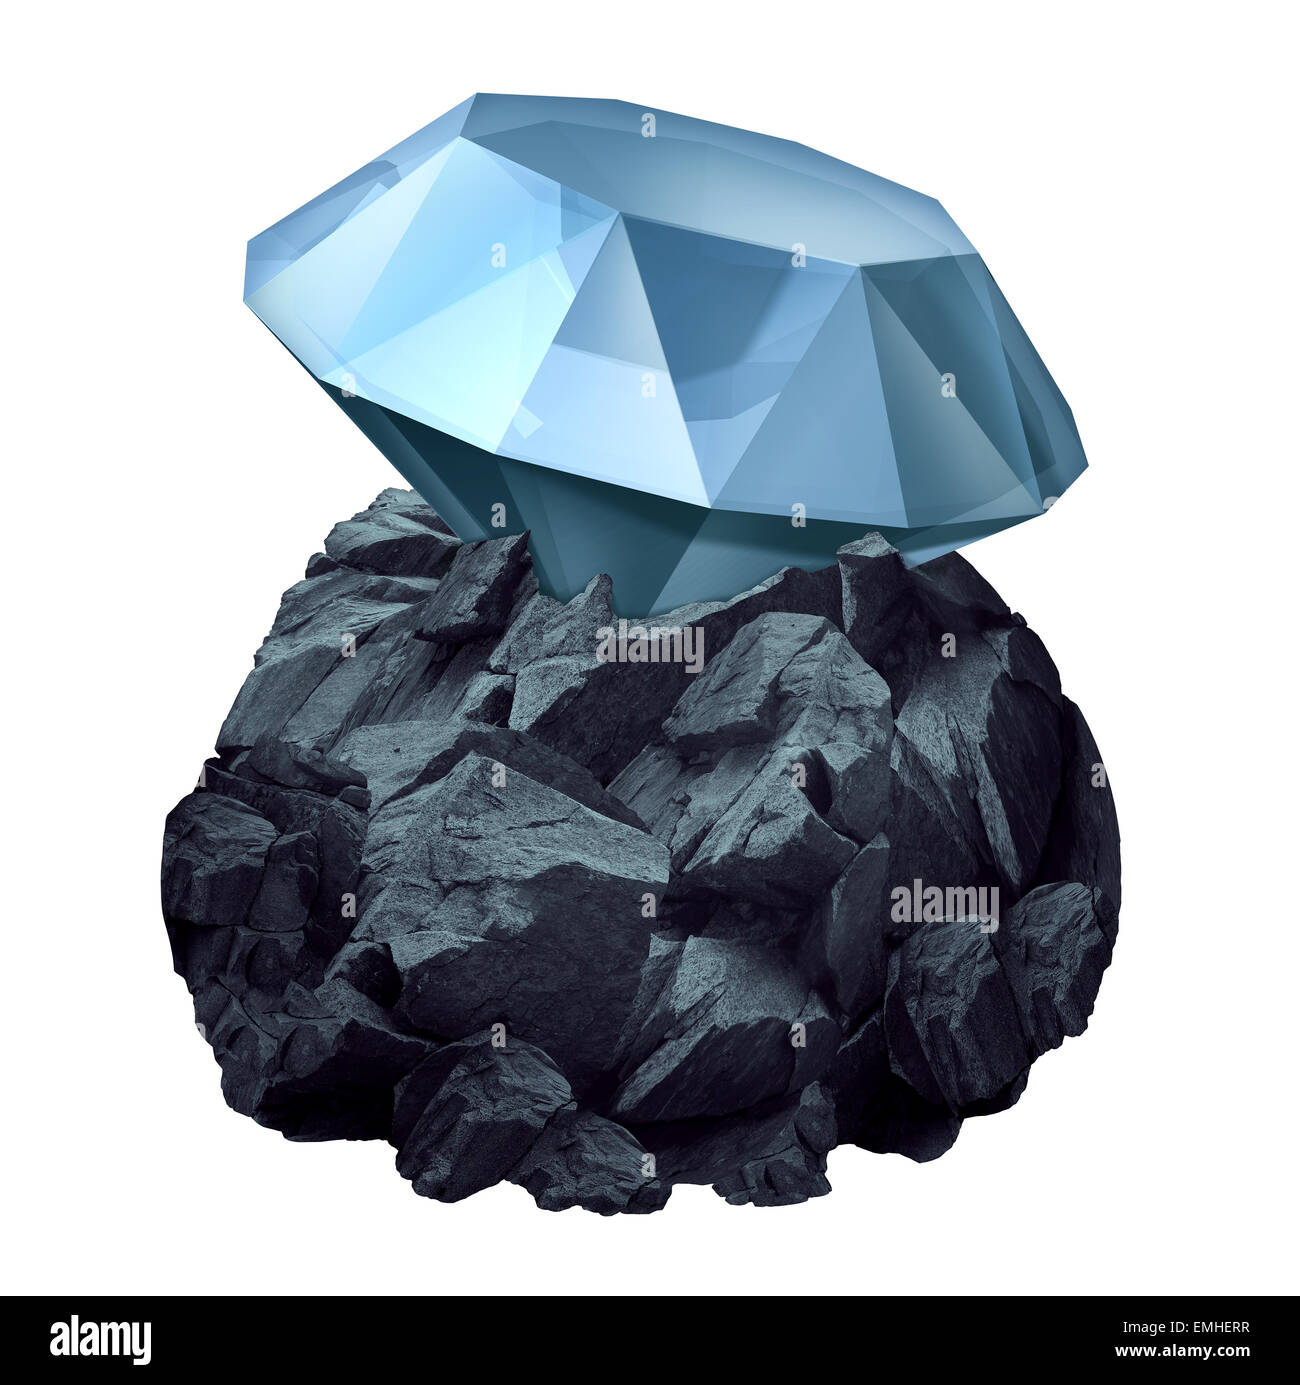 Diamond in the rough as a shiny precious gem hidden in a chunk of jagged rock  as a business symbol and character metaphor for discovery of future potential for success and the value or power within. Stock Photo